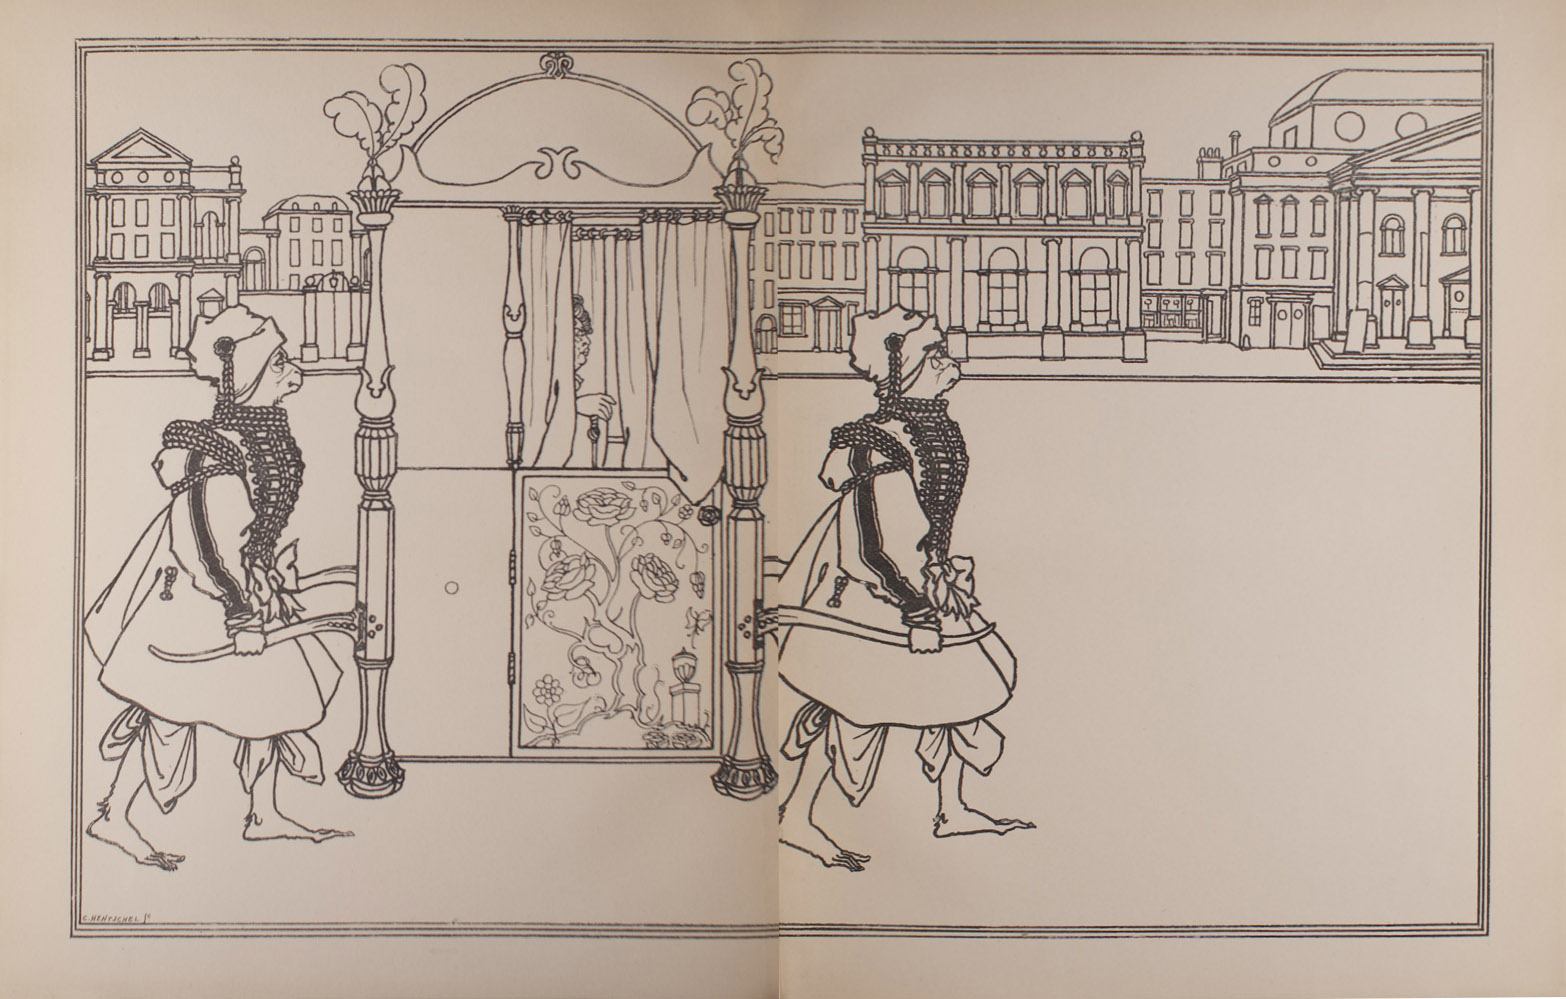 The image is of two apelike figures carrying a sedan chair A figure sits in the chair mostly hidden by curtains The chair is decorated with a rose pattern on the door and feathers extending from the posts The apelike figures are wearing embellished attire with braided coats bows and decorated headpieces They are barefoot In the background there is a city street with buildings The image is vertically displayed and spans two pages a double page opening